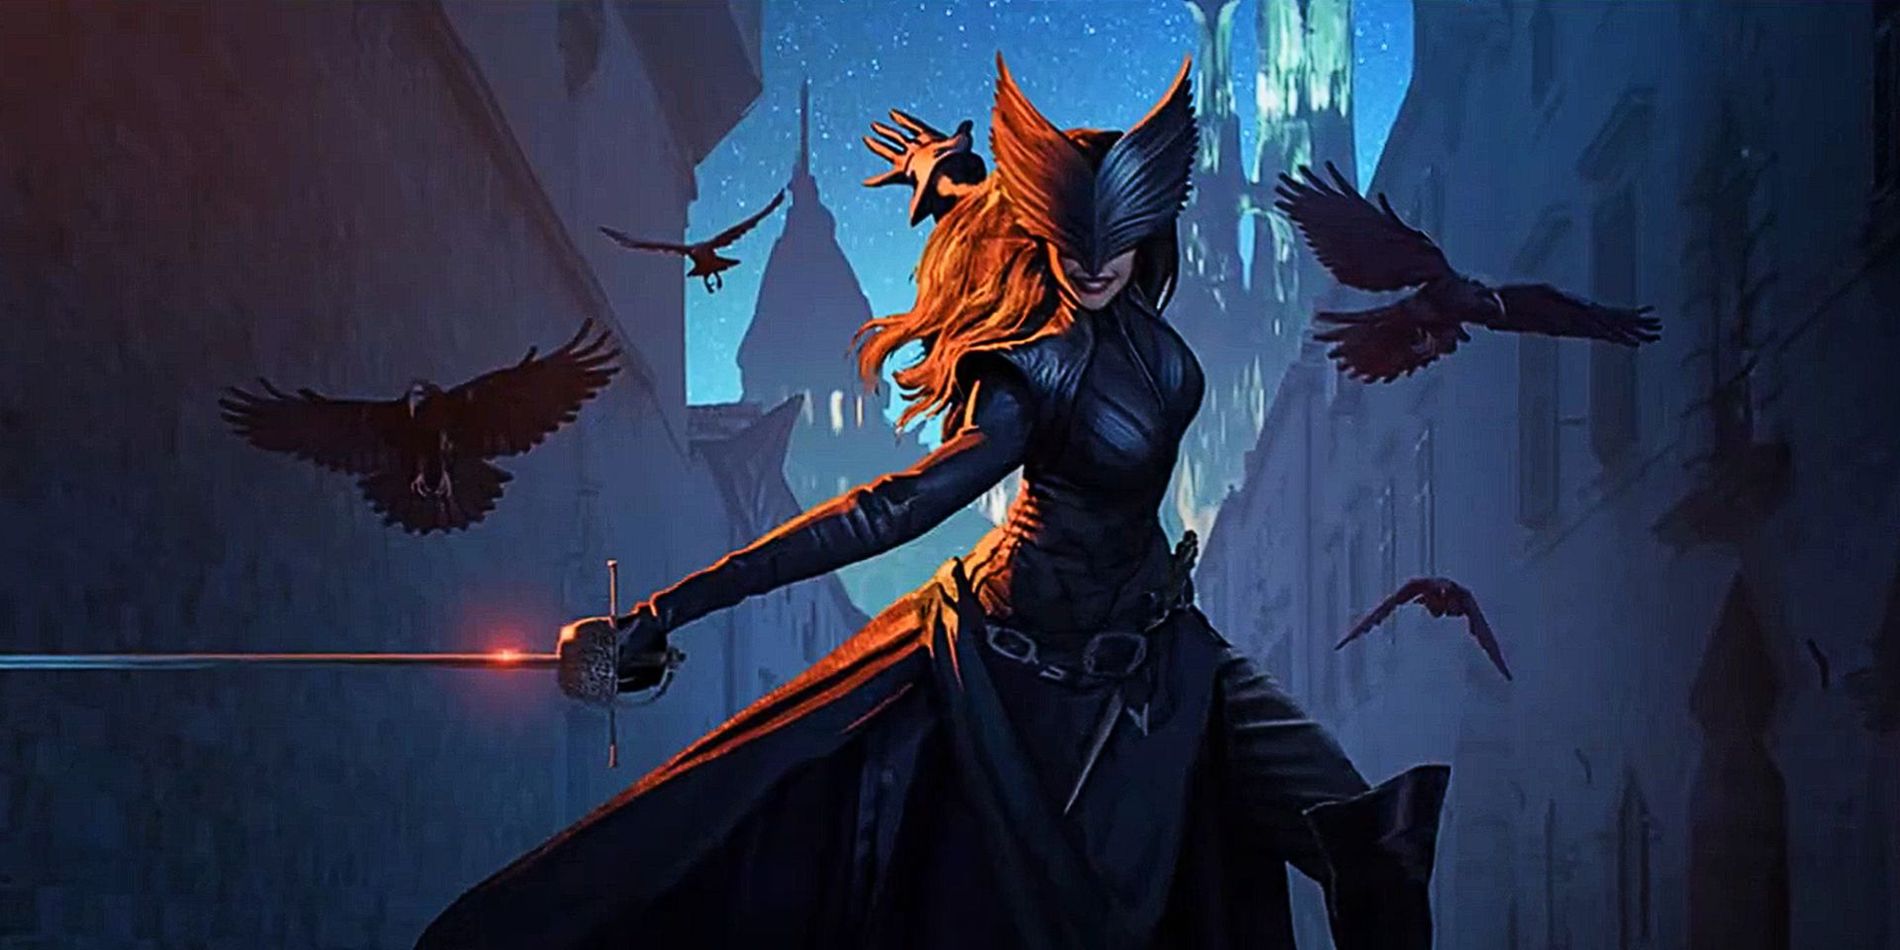 Concept art depicting a female character wielding a sword